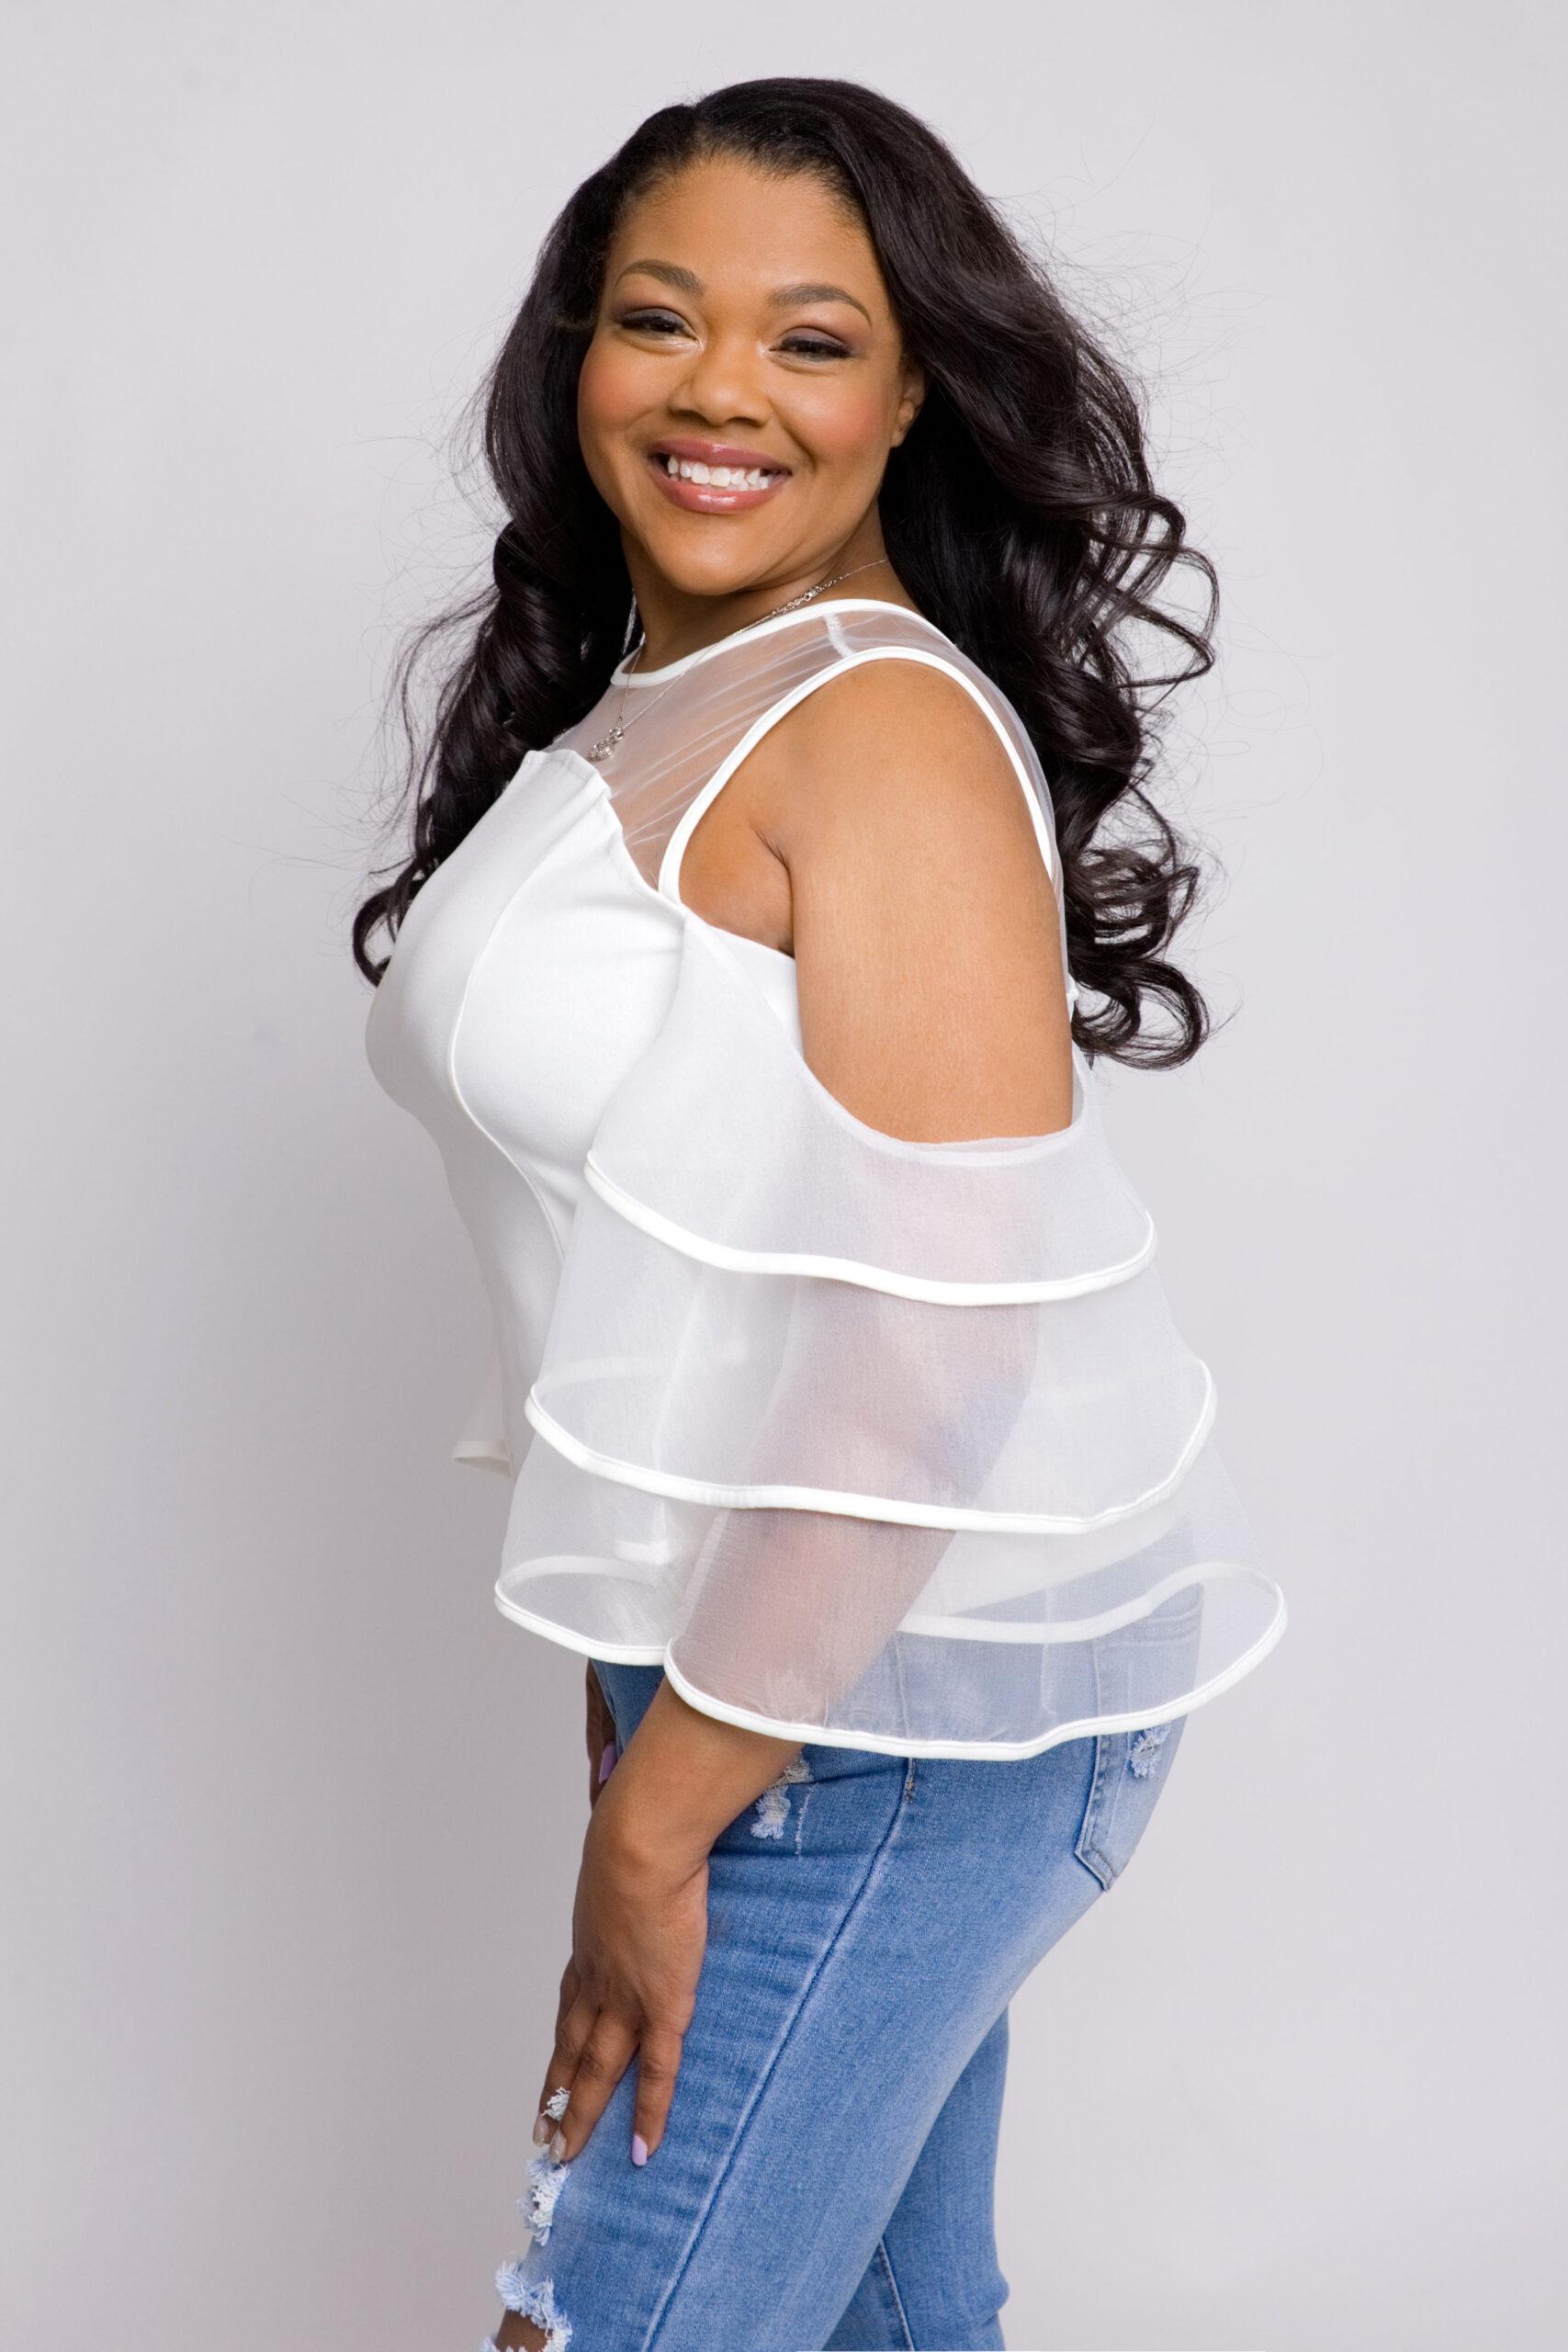 Black woman posing in jeans and white sheer trumpet sleeve blouse while smiling